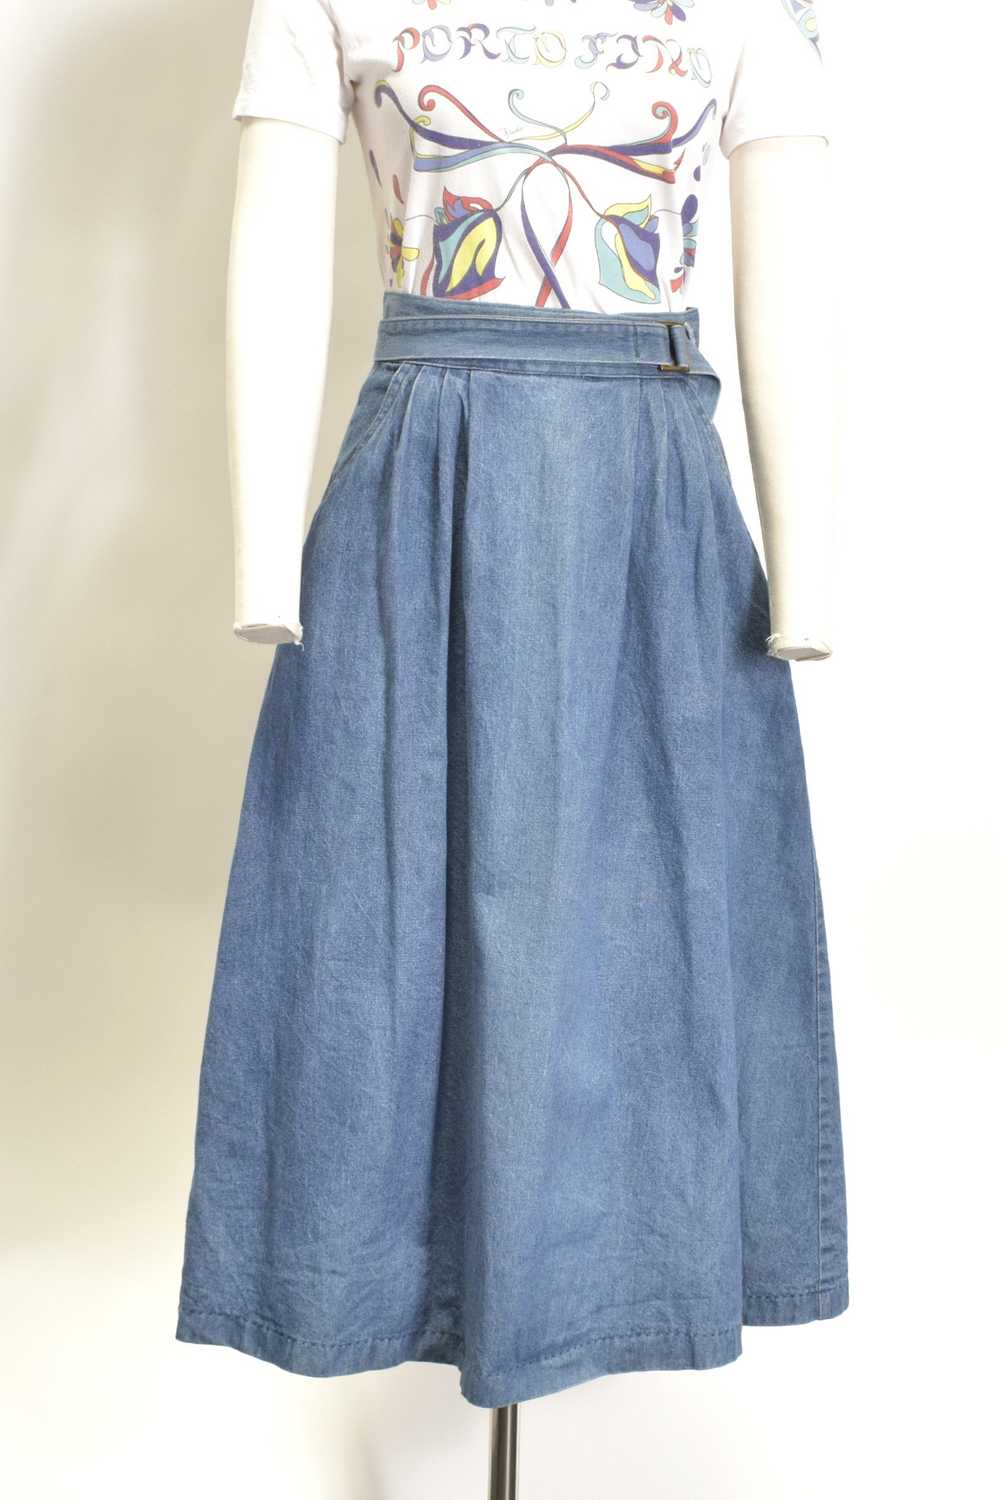 1980s Wool and Leather Skirt-small - image 11